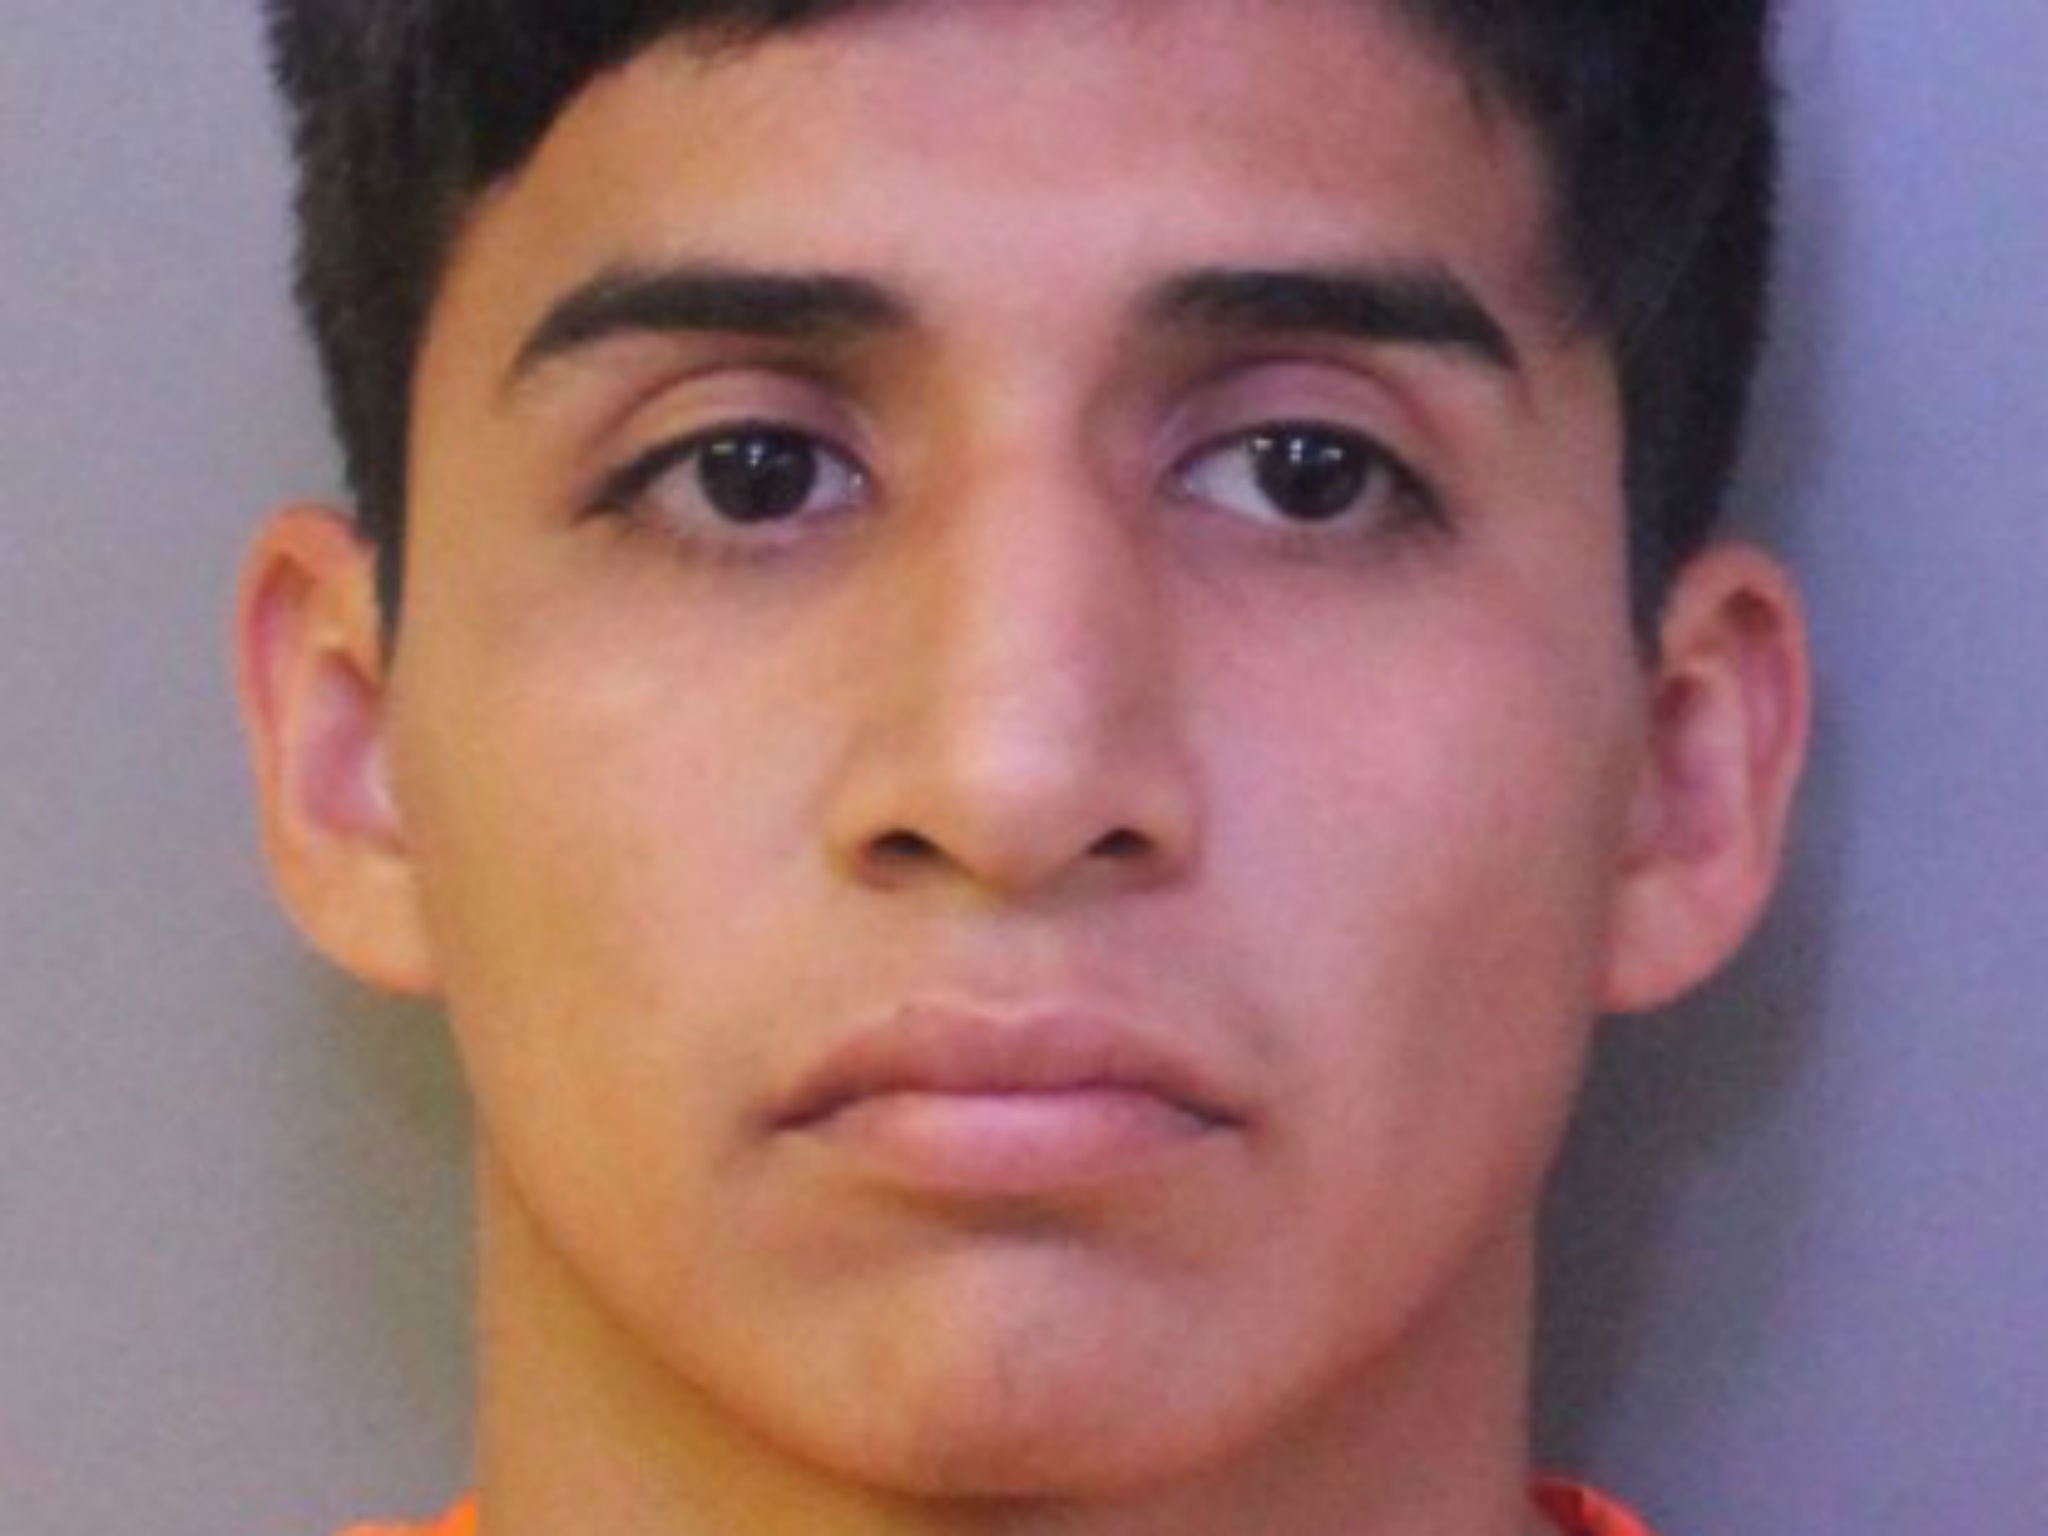 Jose Bernardo Rosas Madrigal is accused of arson and attempted murder